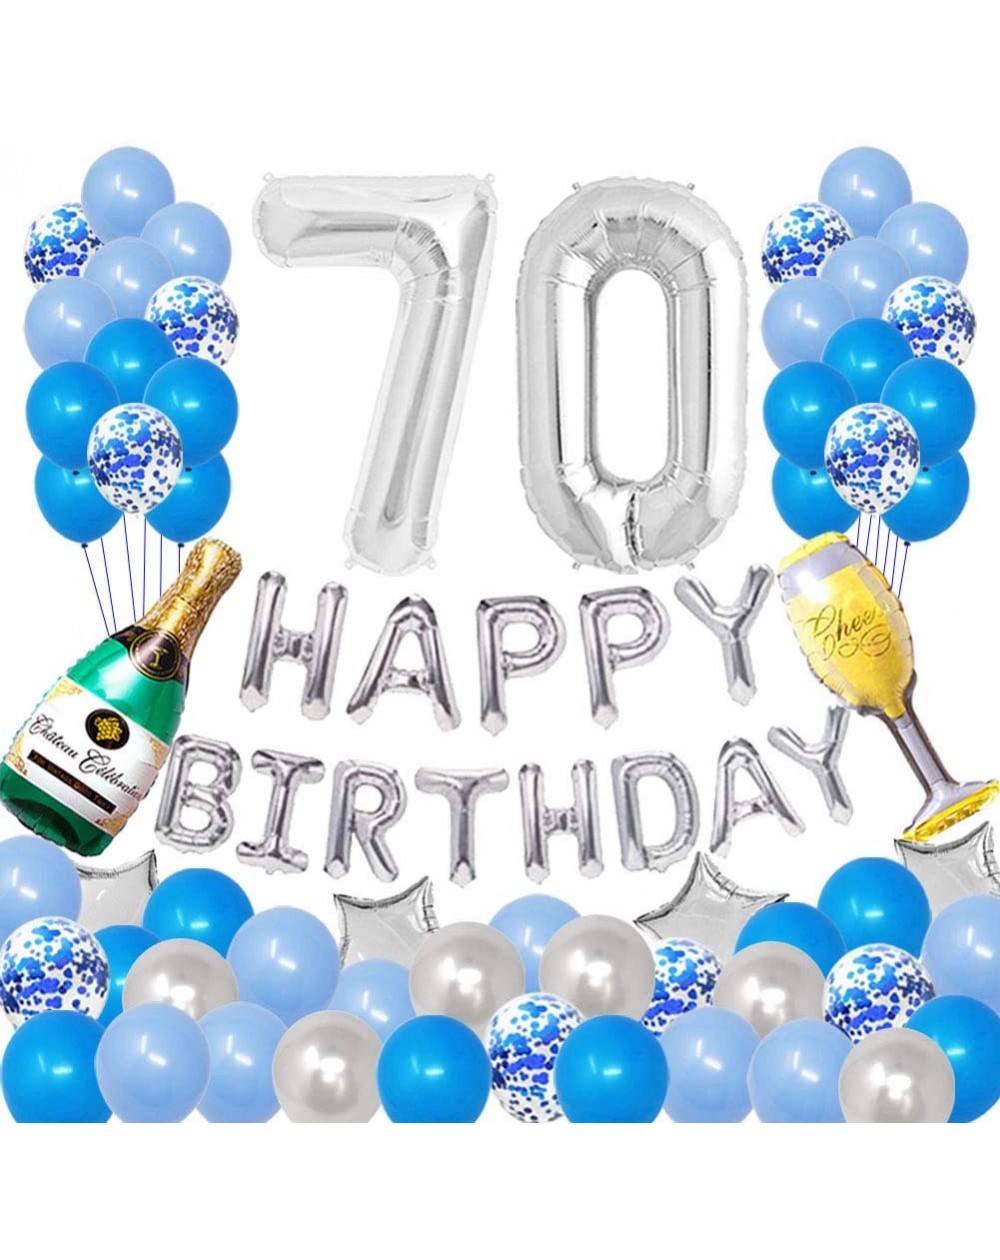 Balloons Happy 70TH Birthday Party Decorations Pack-Blue Silver Theme- Happy Birthday Banner Foil Number 70 12Inch Silver Con...